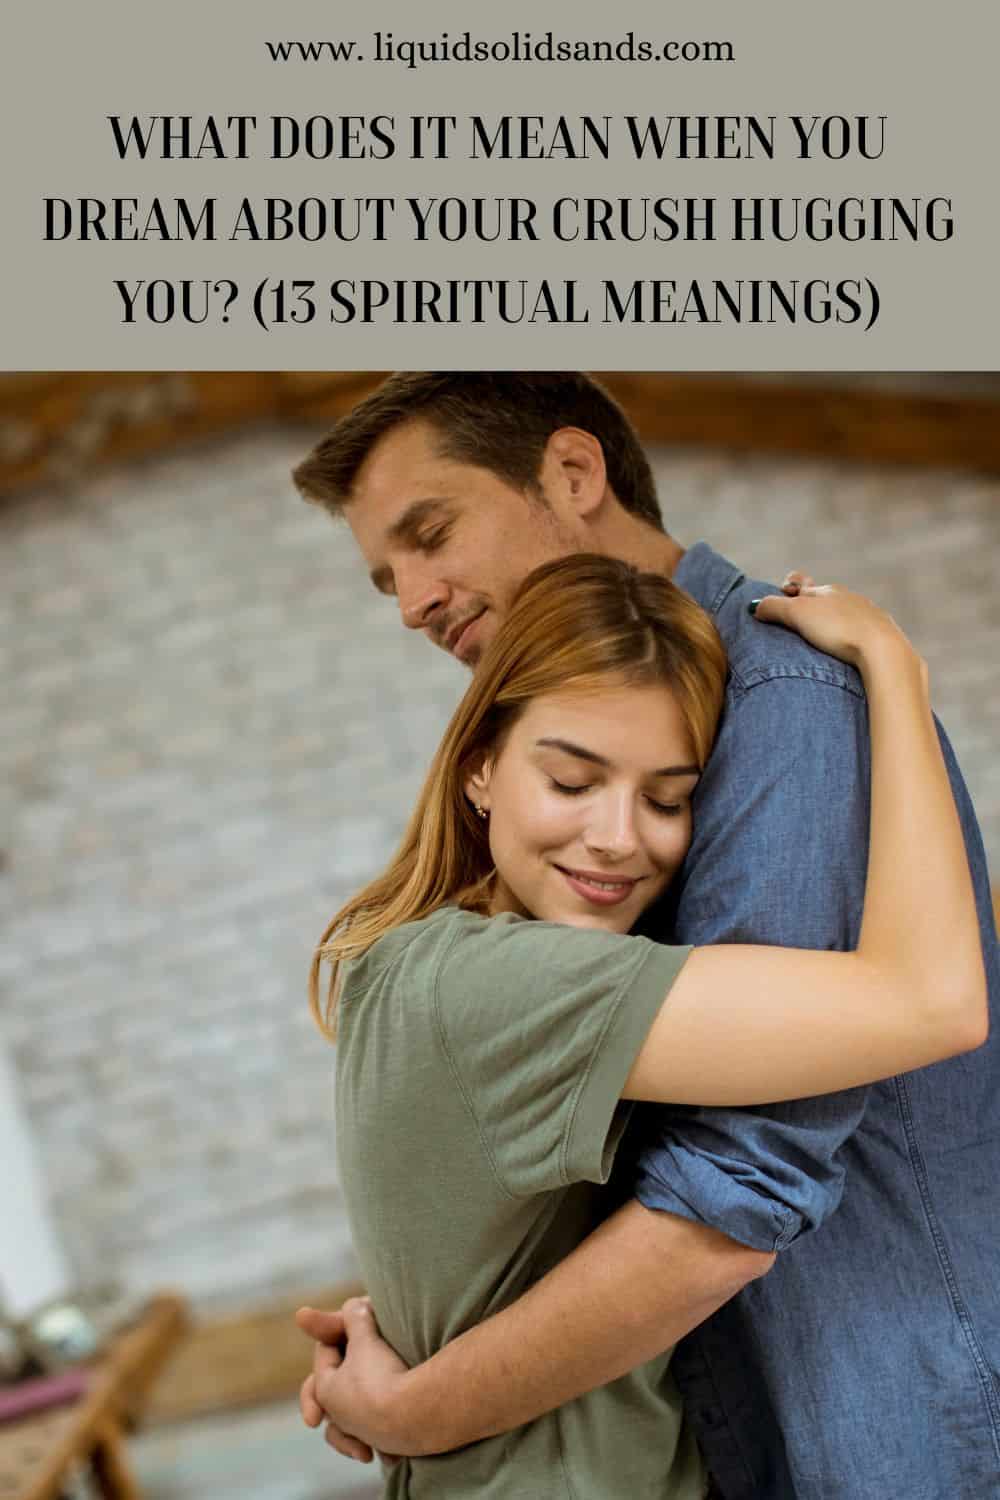 What Does It Mean When You Dream About Your Crush Hugging You? (13 Spiritual Meanings)